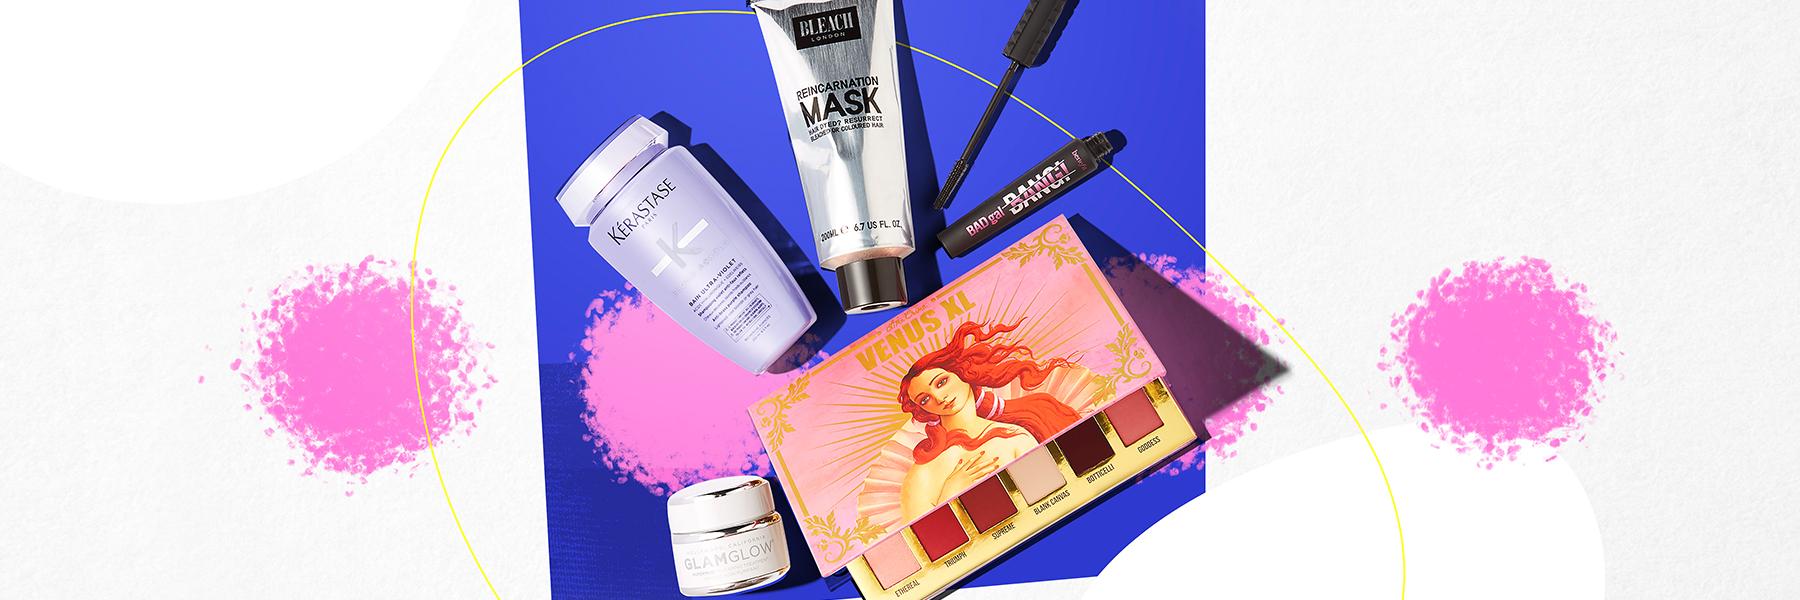 beauty products from hqhair.com